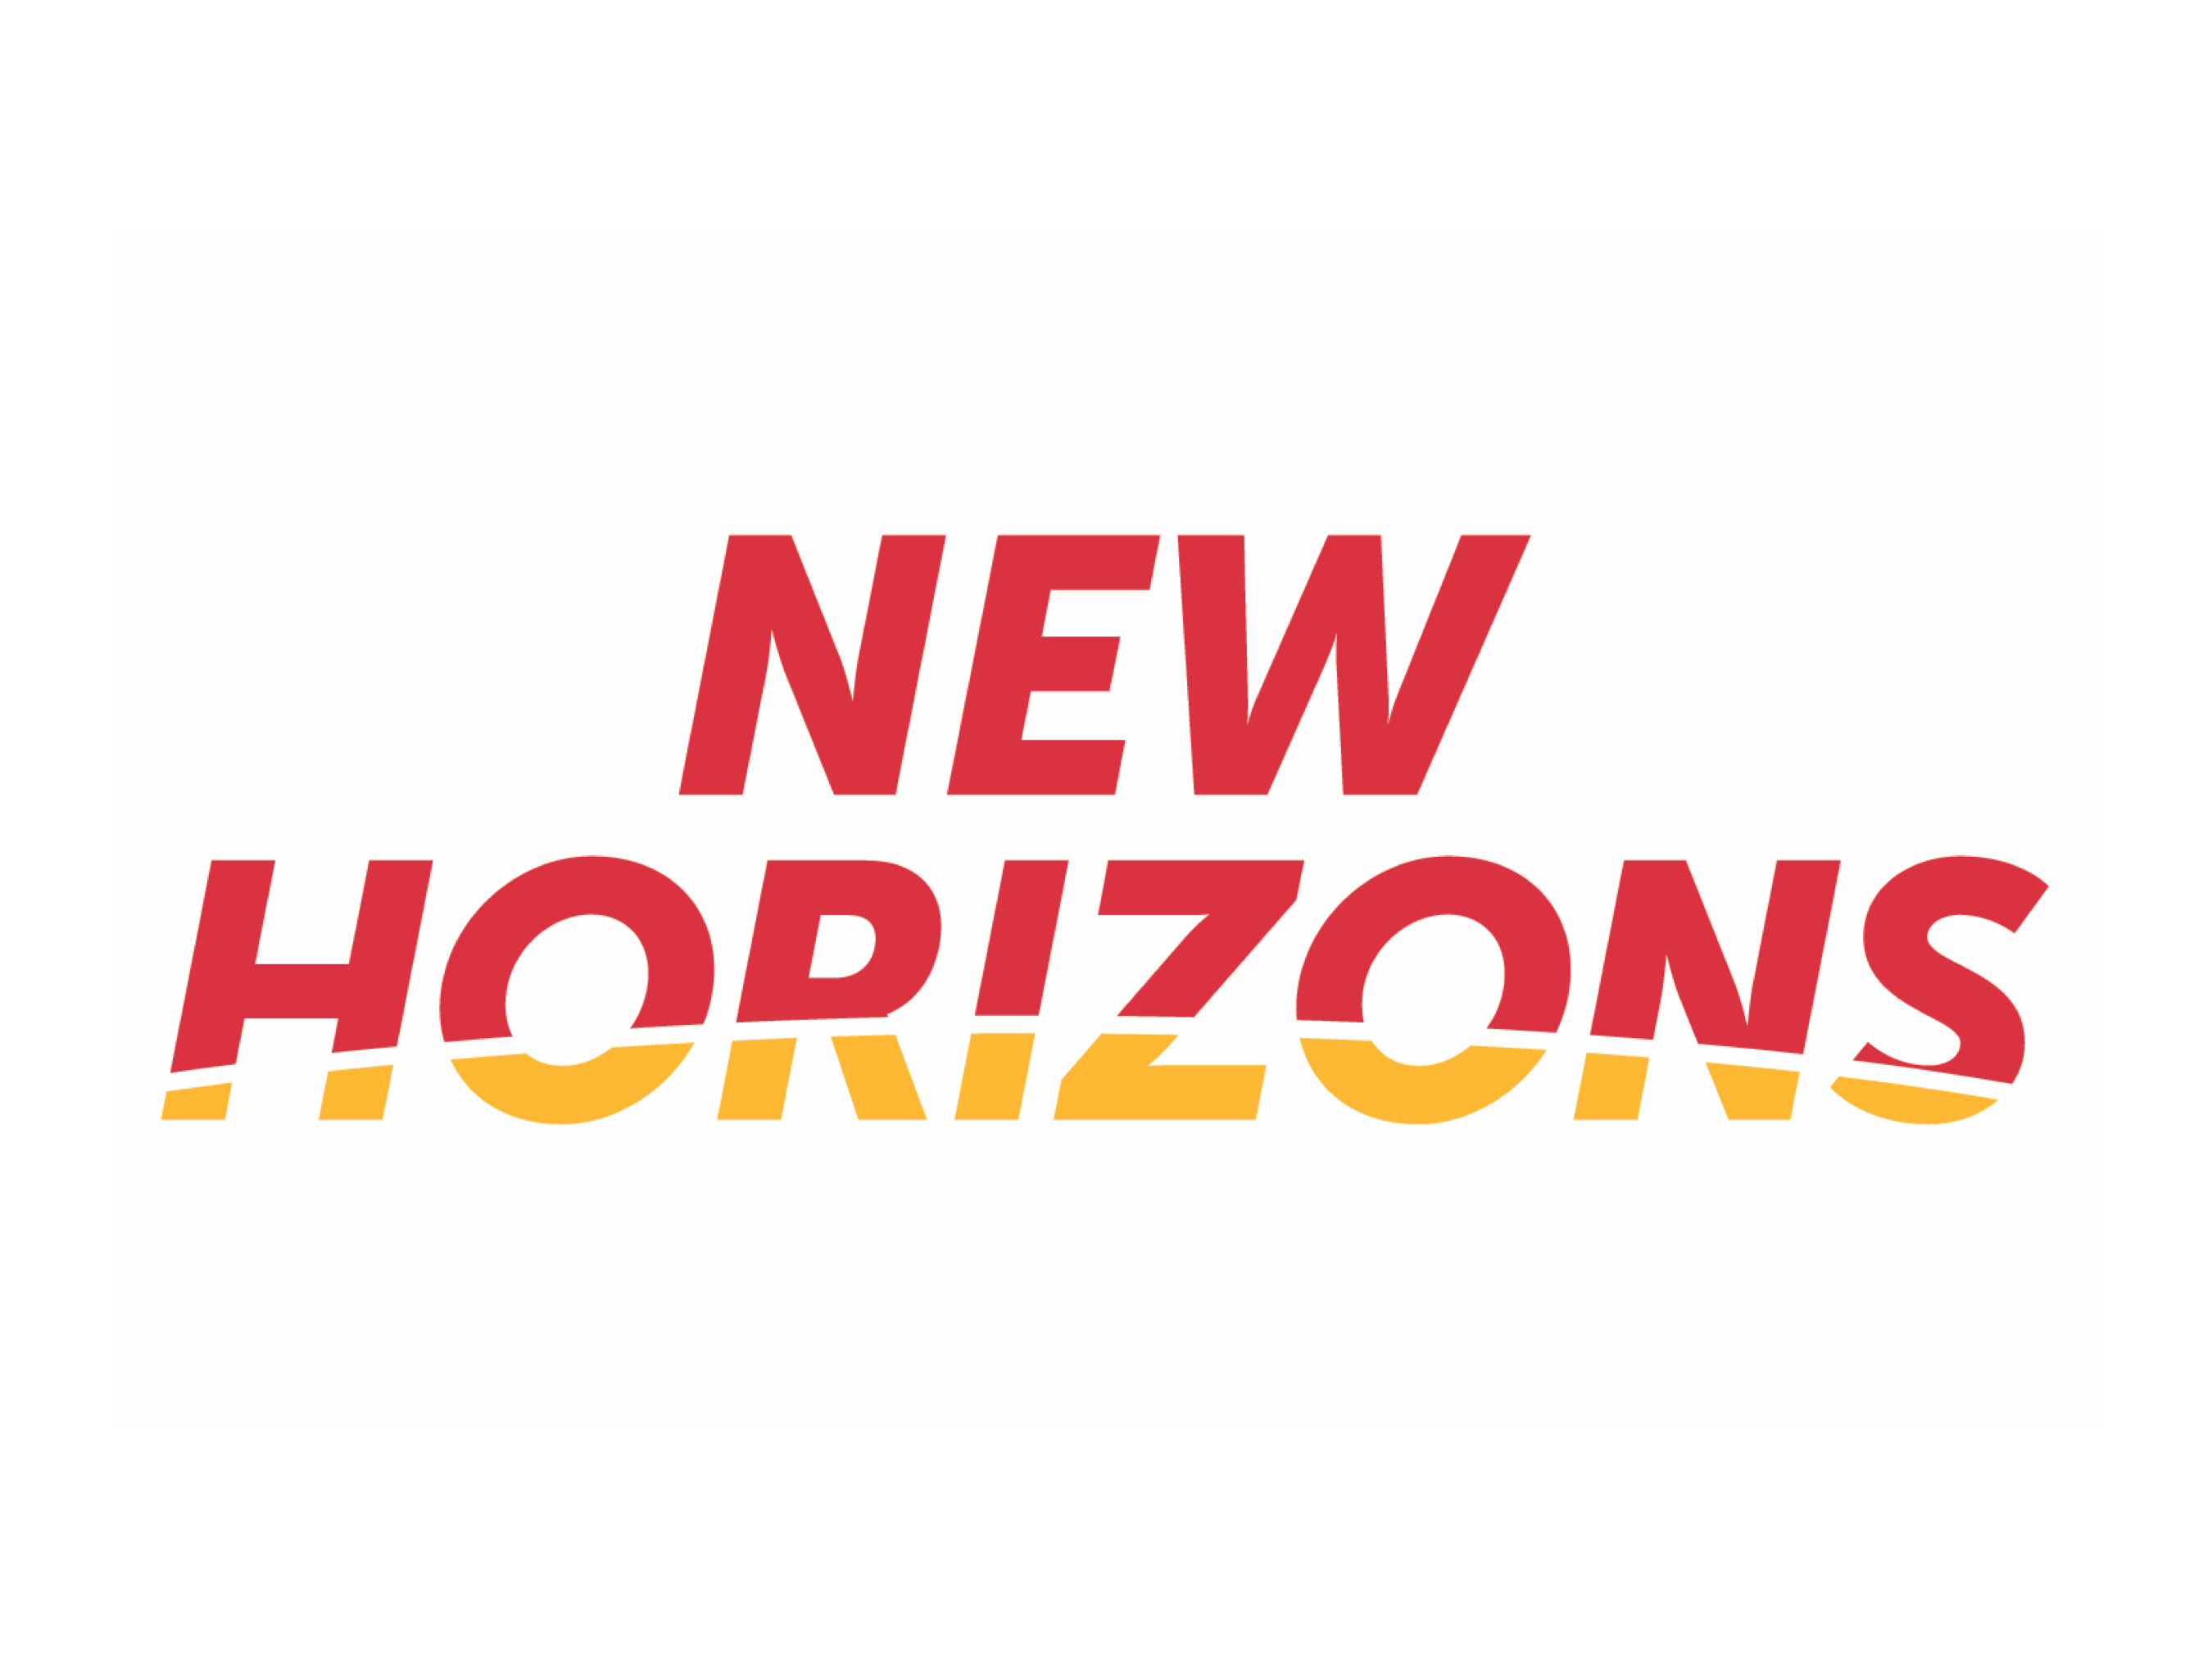 Logo for New Horizons, which is Pilot Company’s largest investment to-date in store modernization to enhance the guest and team member experience at its travel centers nationwide.